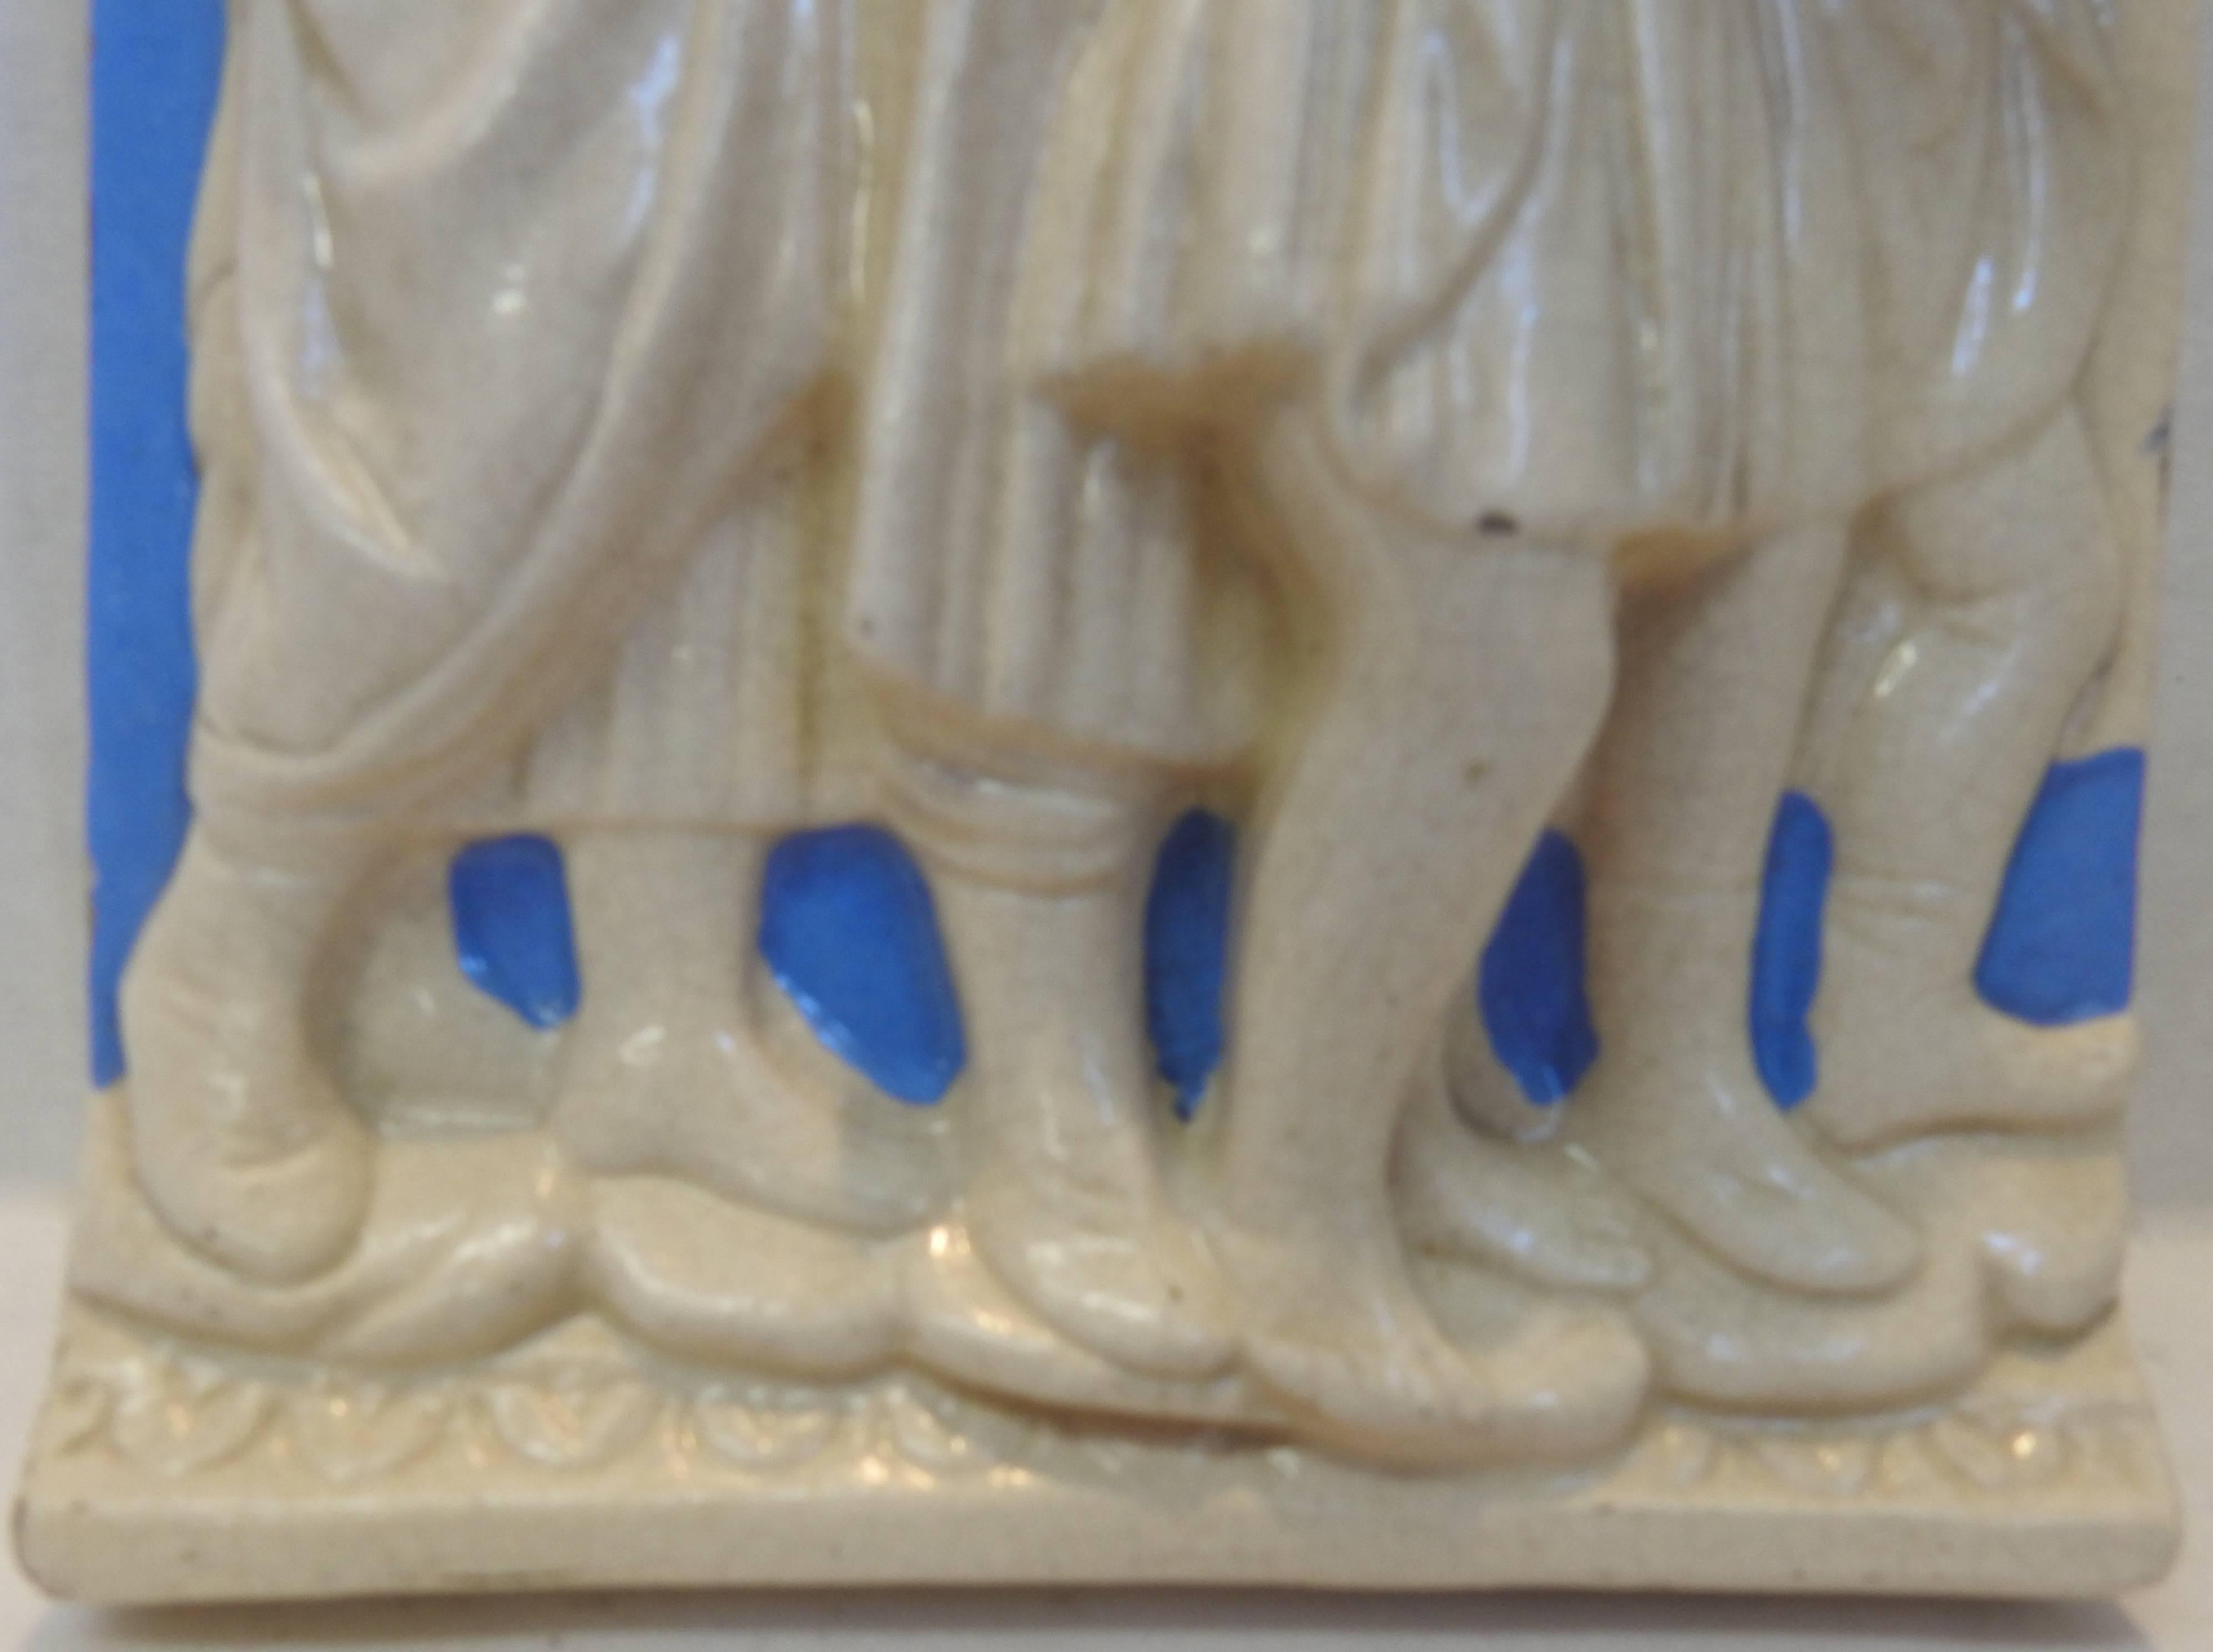 This listing features a high relief Della Robbia polychrome glazed pottery plaque that was made in Italy. It has a group of choir boys singing from a hymnal in their Classic blue and white glaze. It is marked on the back with a signature and Italy.